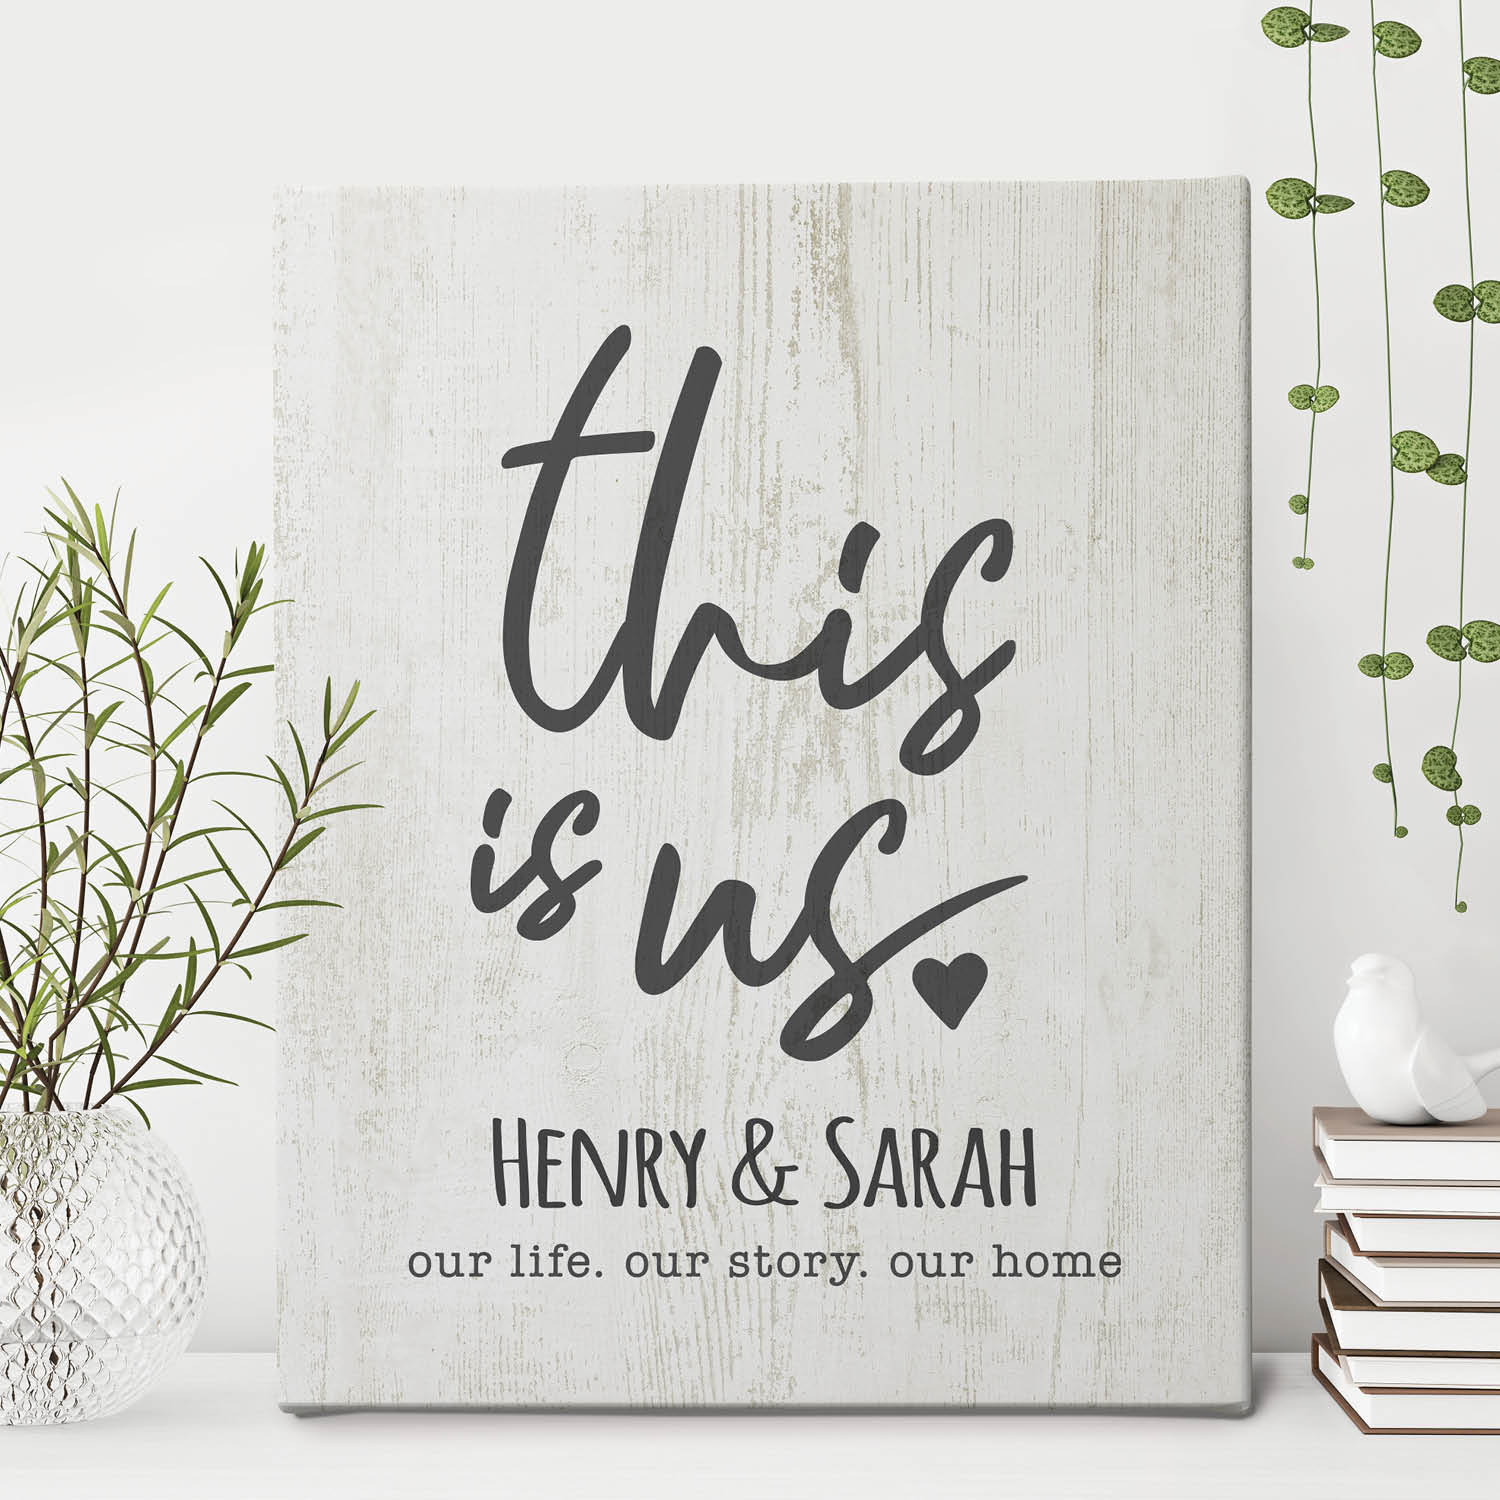 This Is Us Personalized 16x20 Canvas